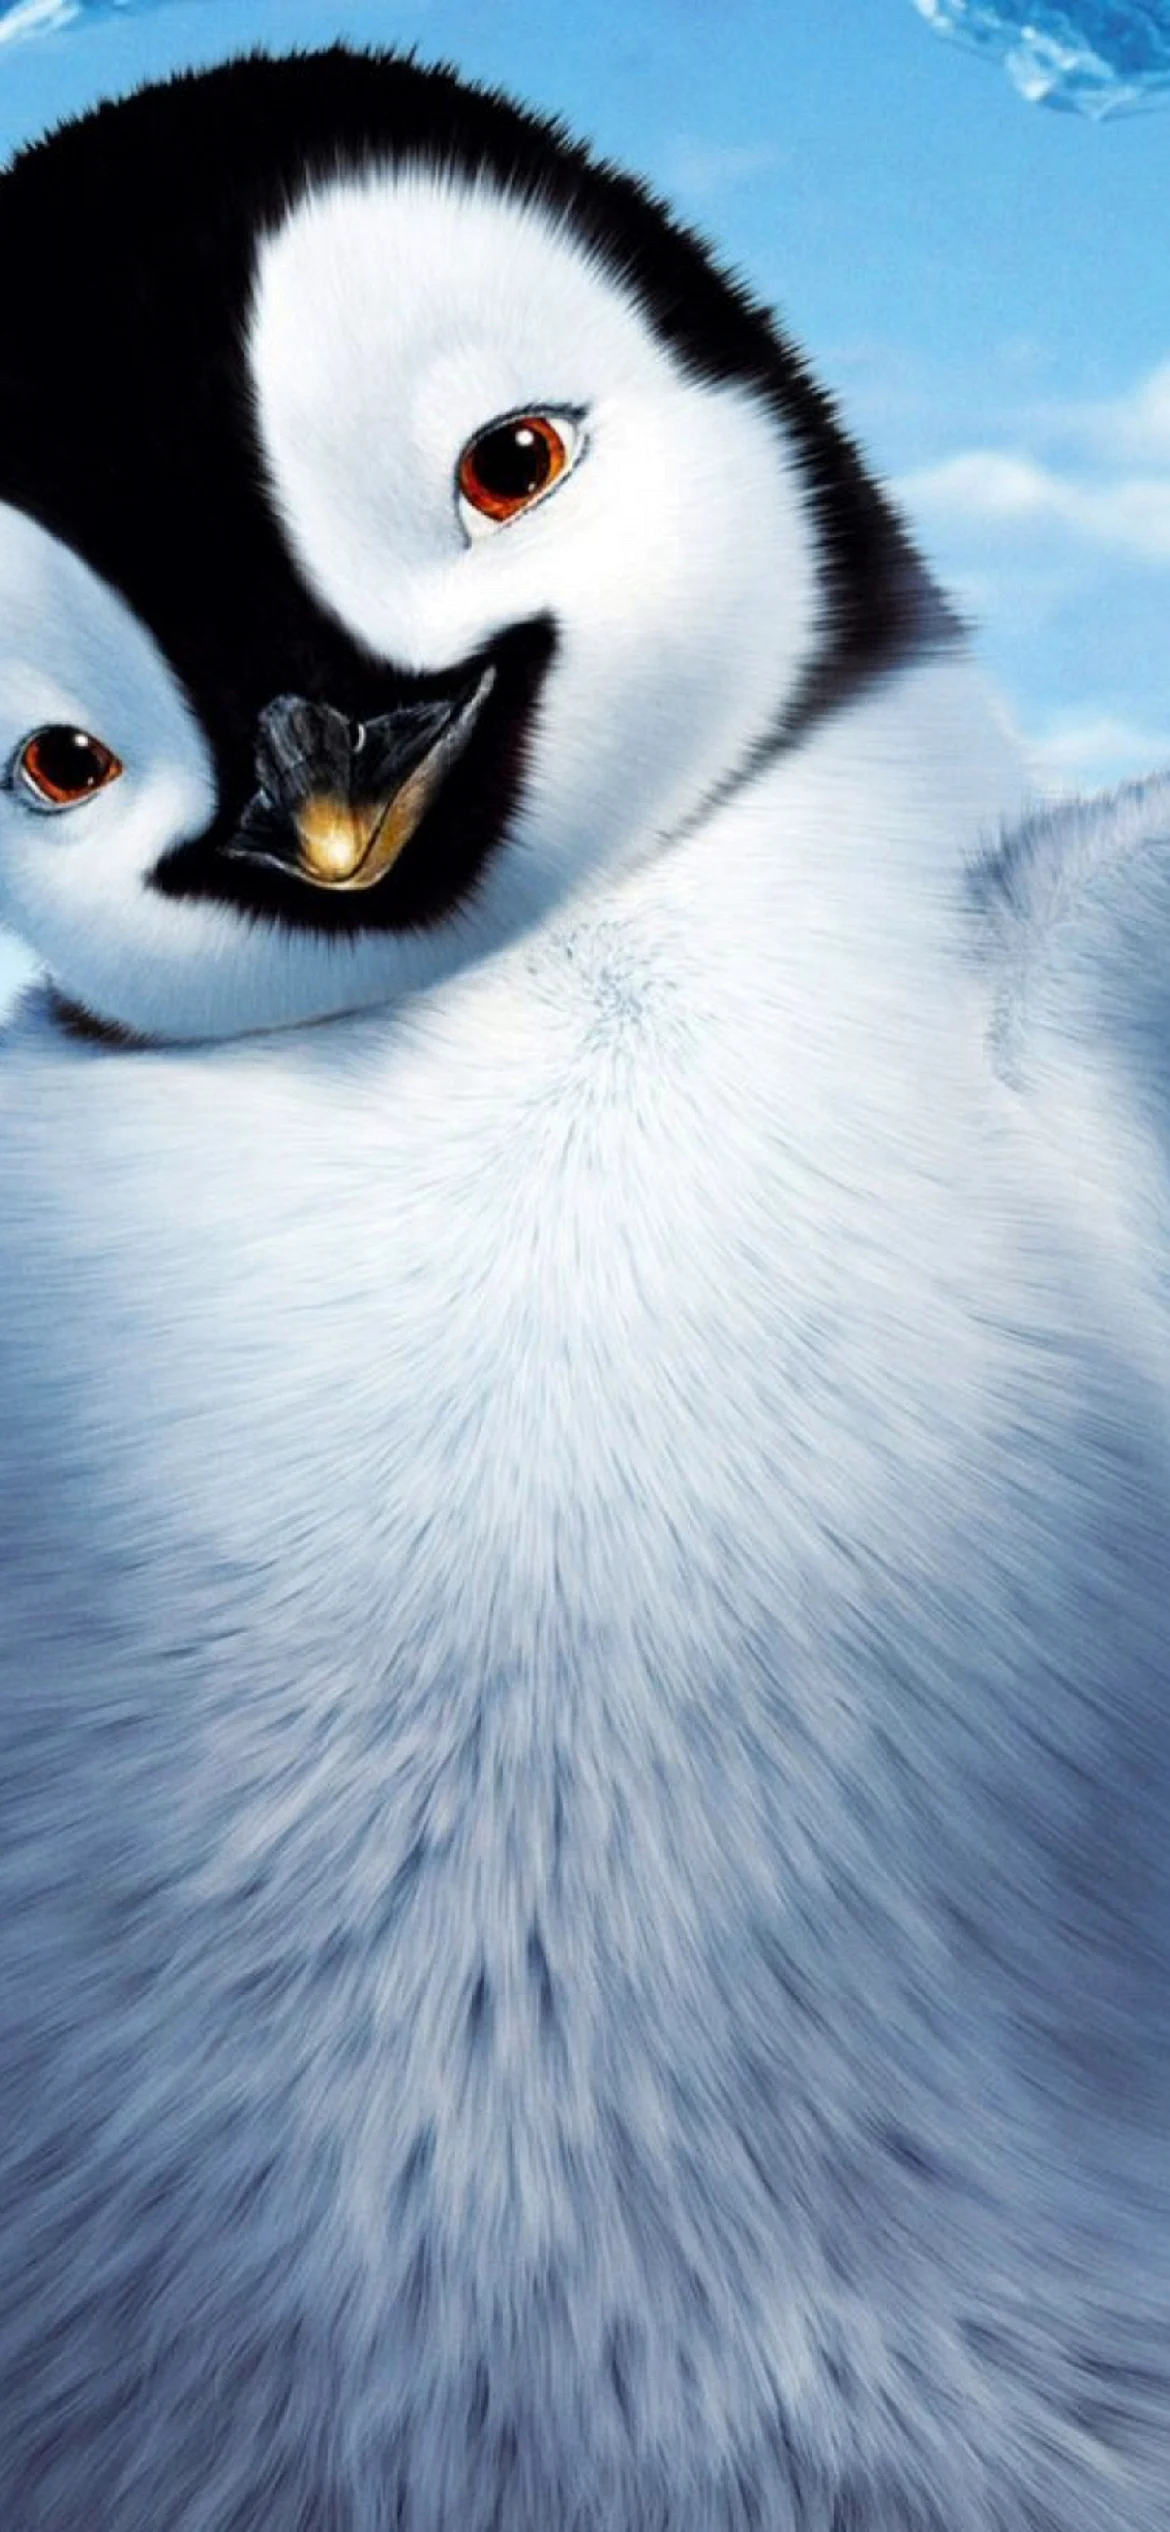 Happy Feet 2 Wallpaper for iPhone 13 Pro